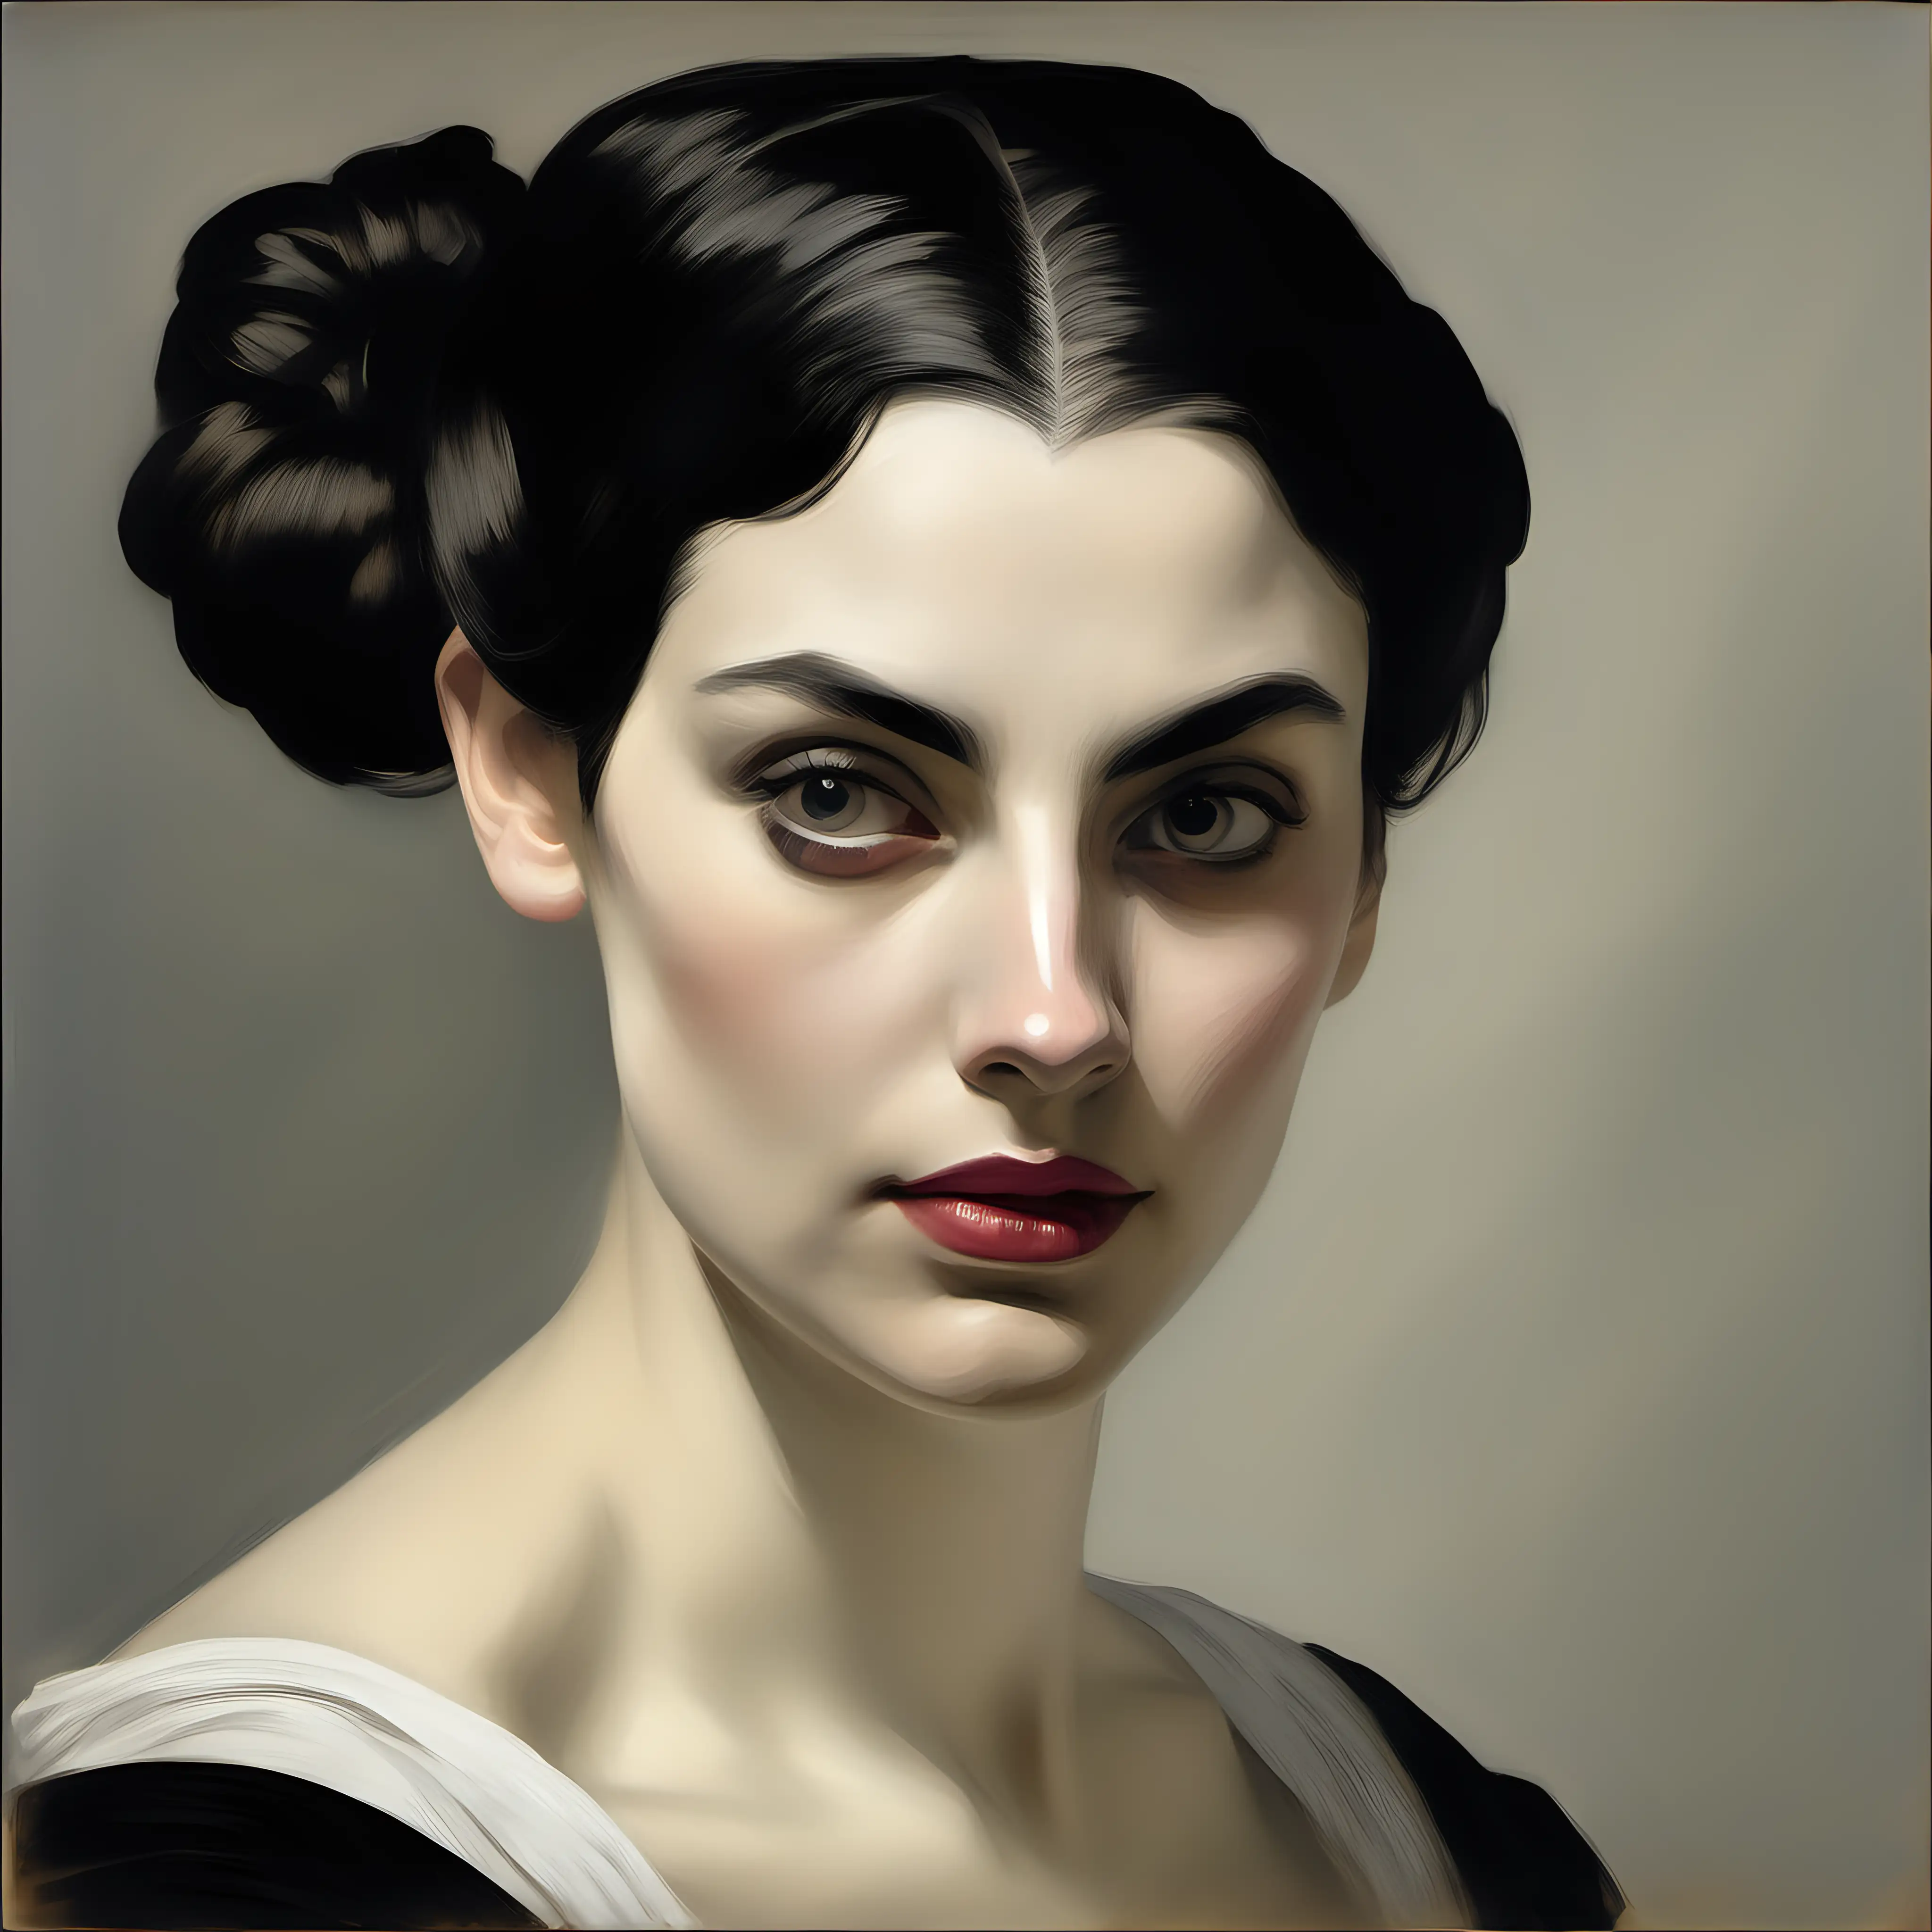 Elegant Portrait of a Young Woman with Dark Hair in Chignon